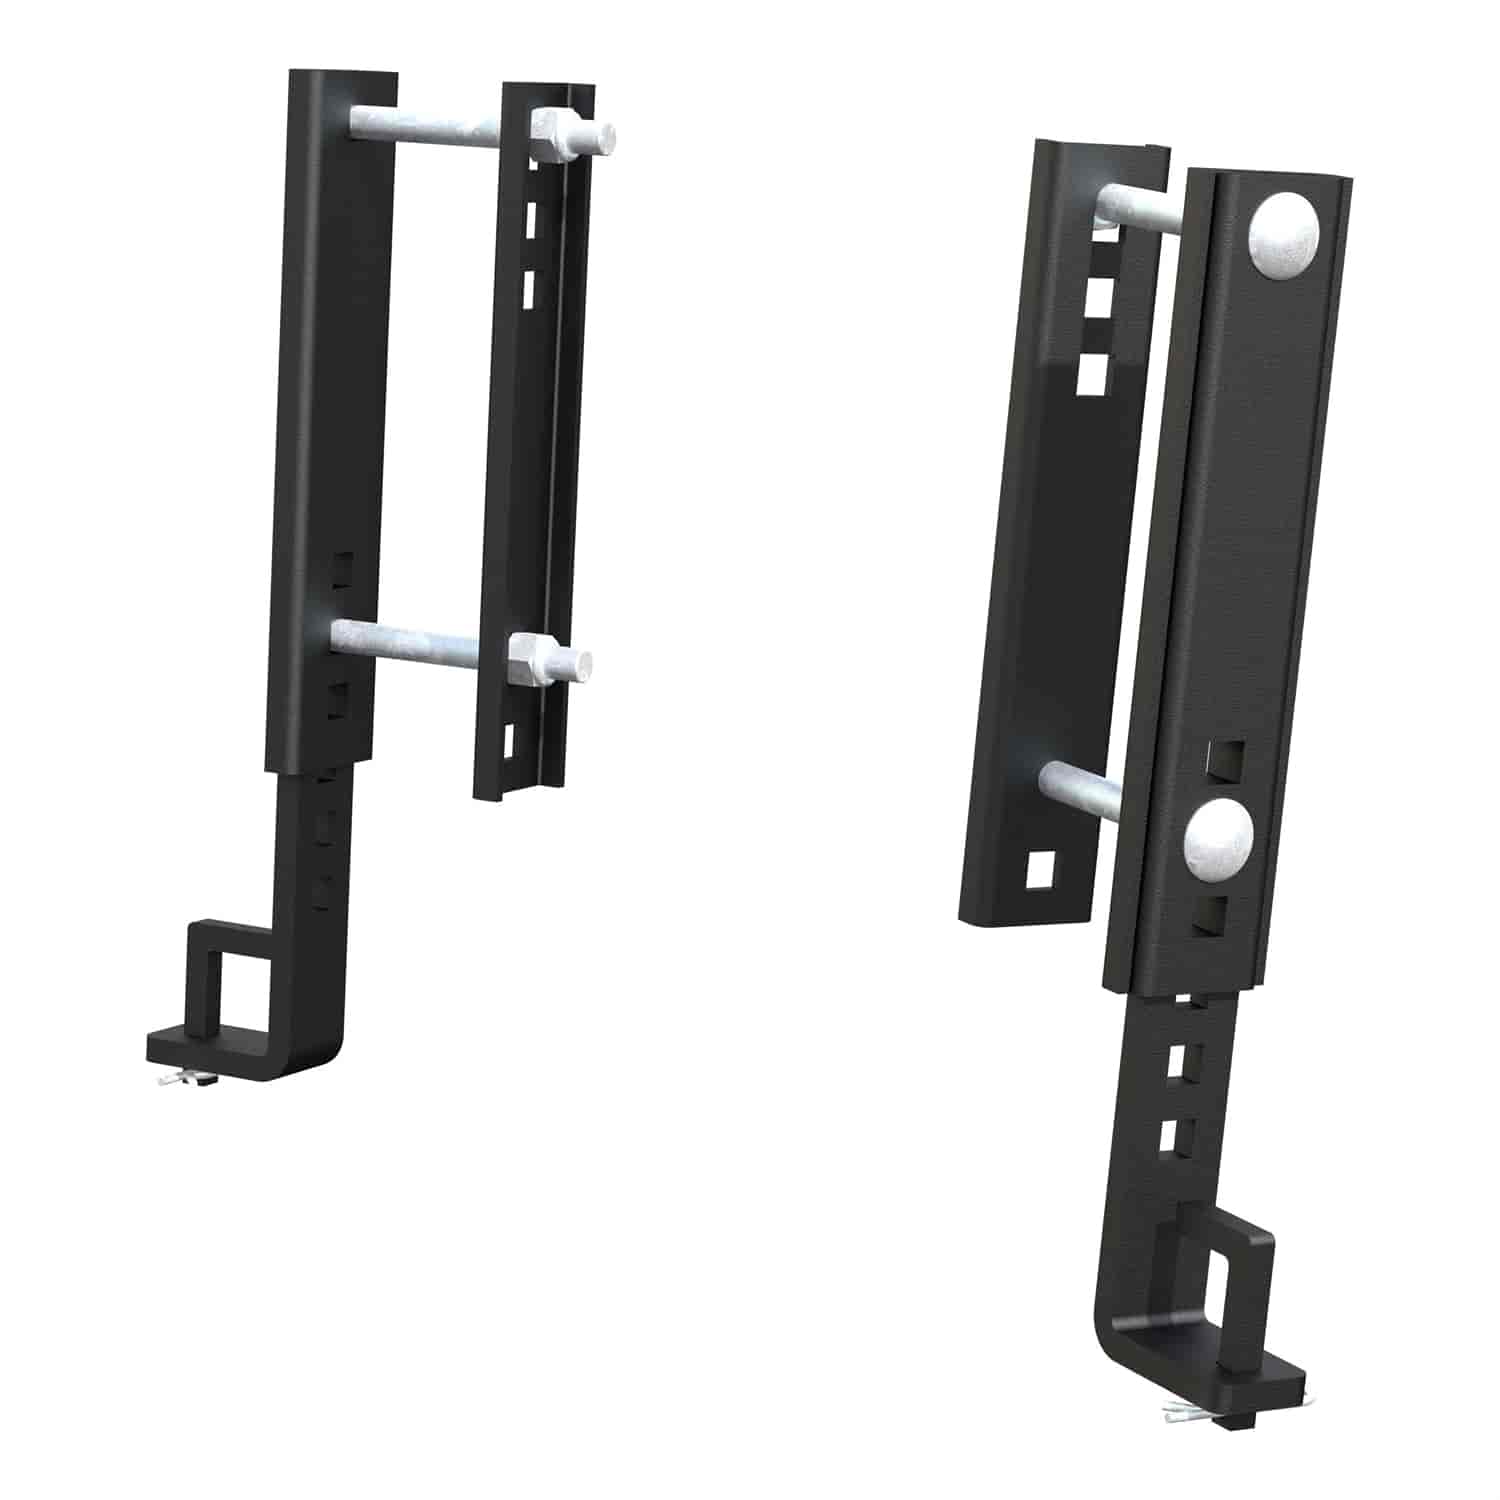 REPLACEMENT BRACKETS FOR